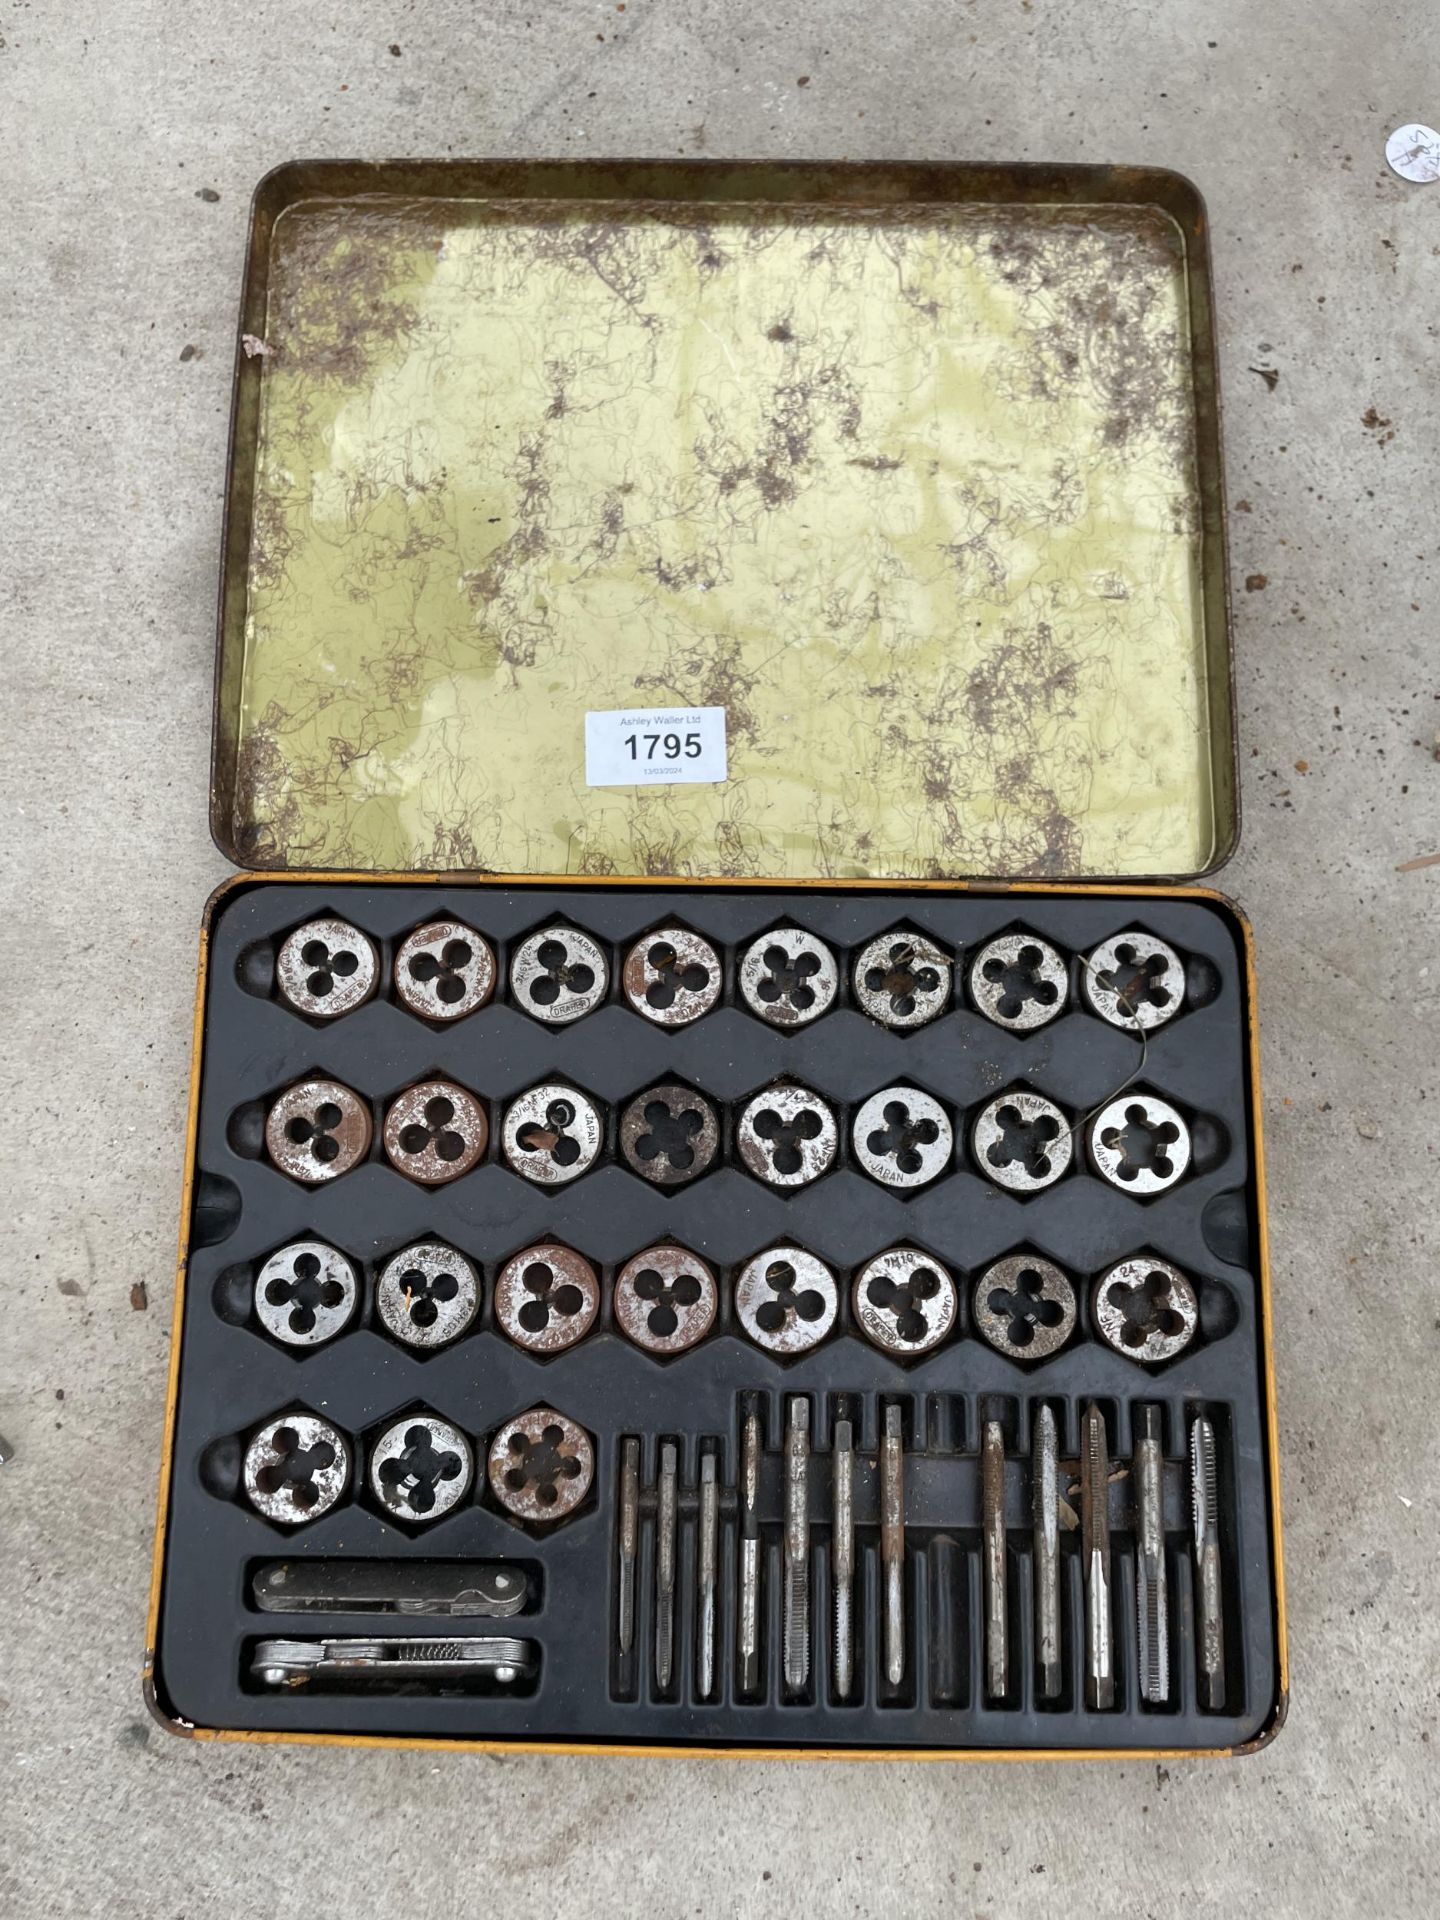 A COMPLETE CASED DRAPER TAP AND DIE SET